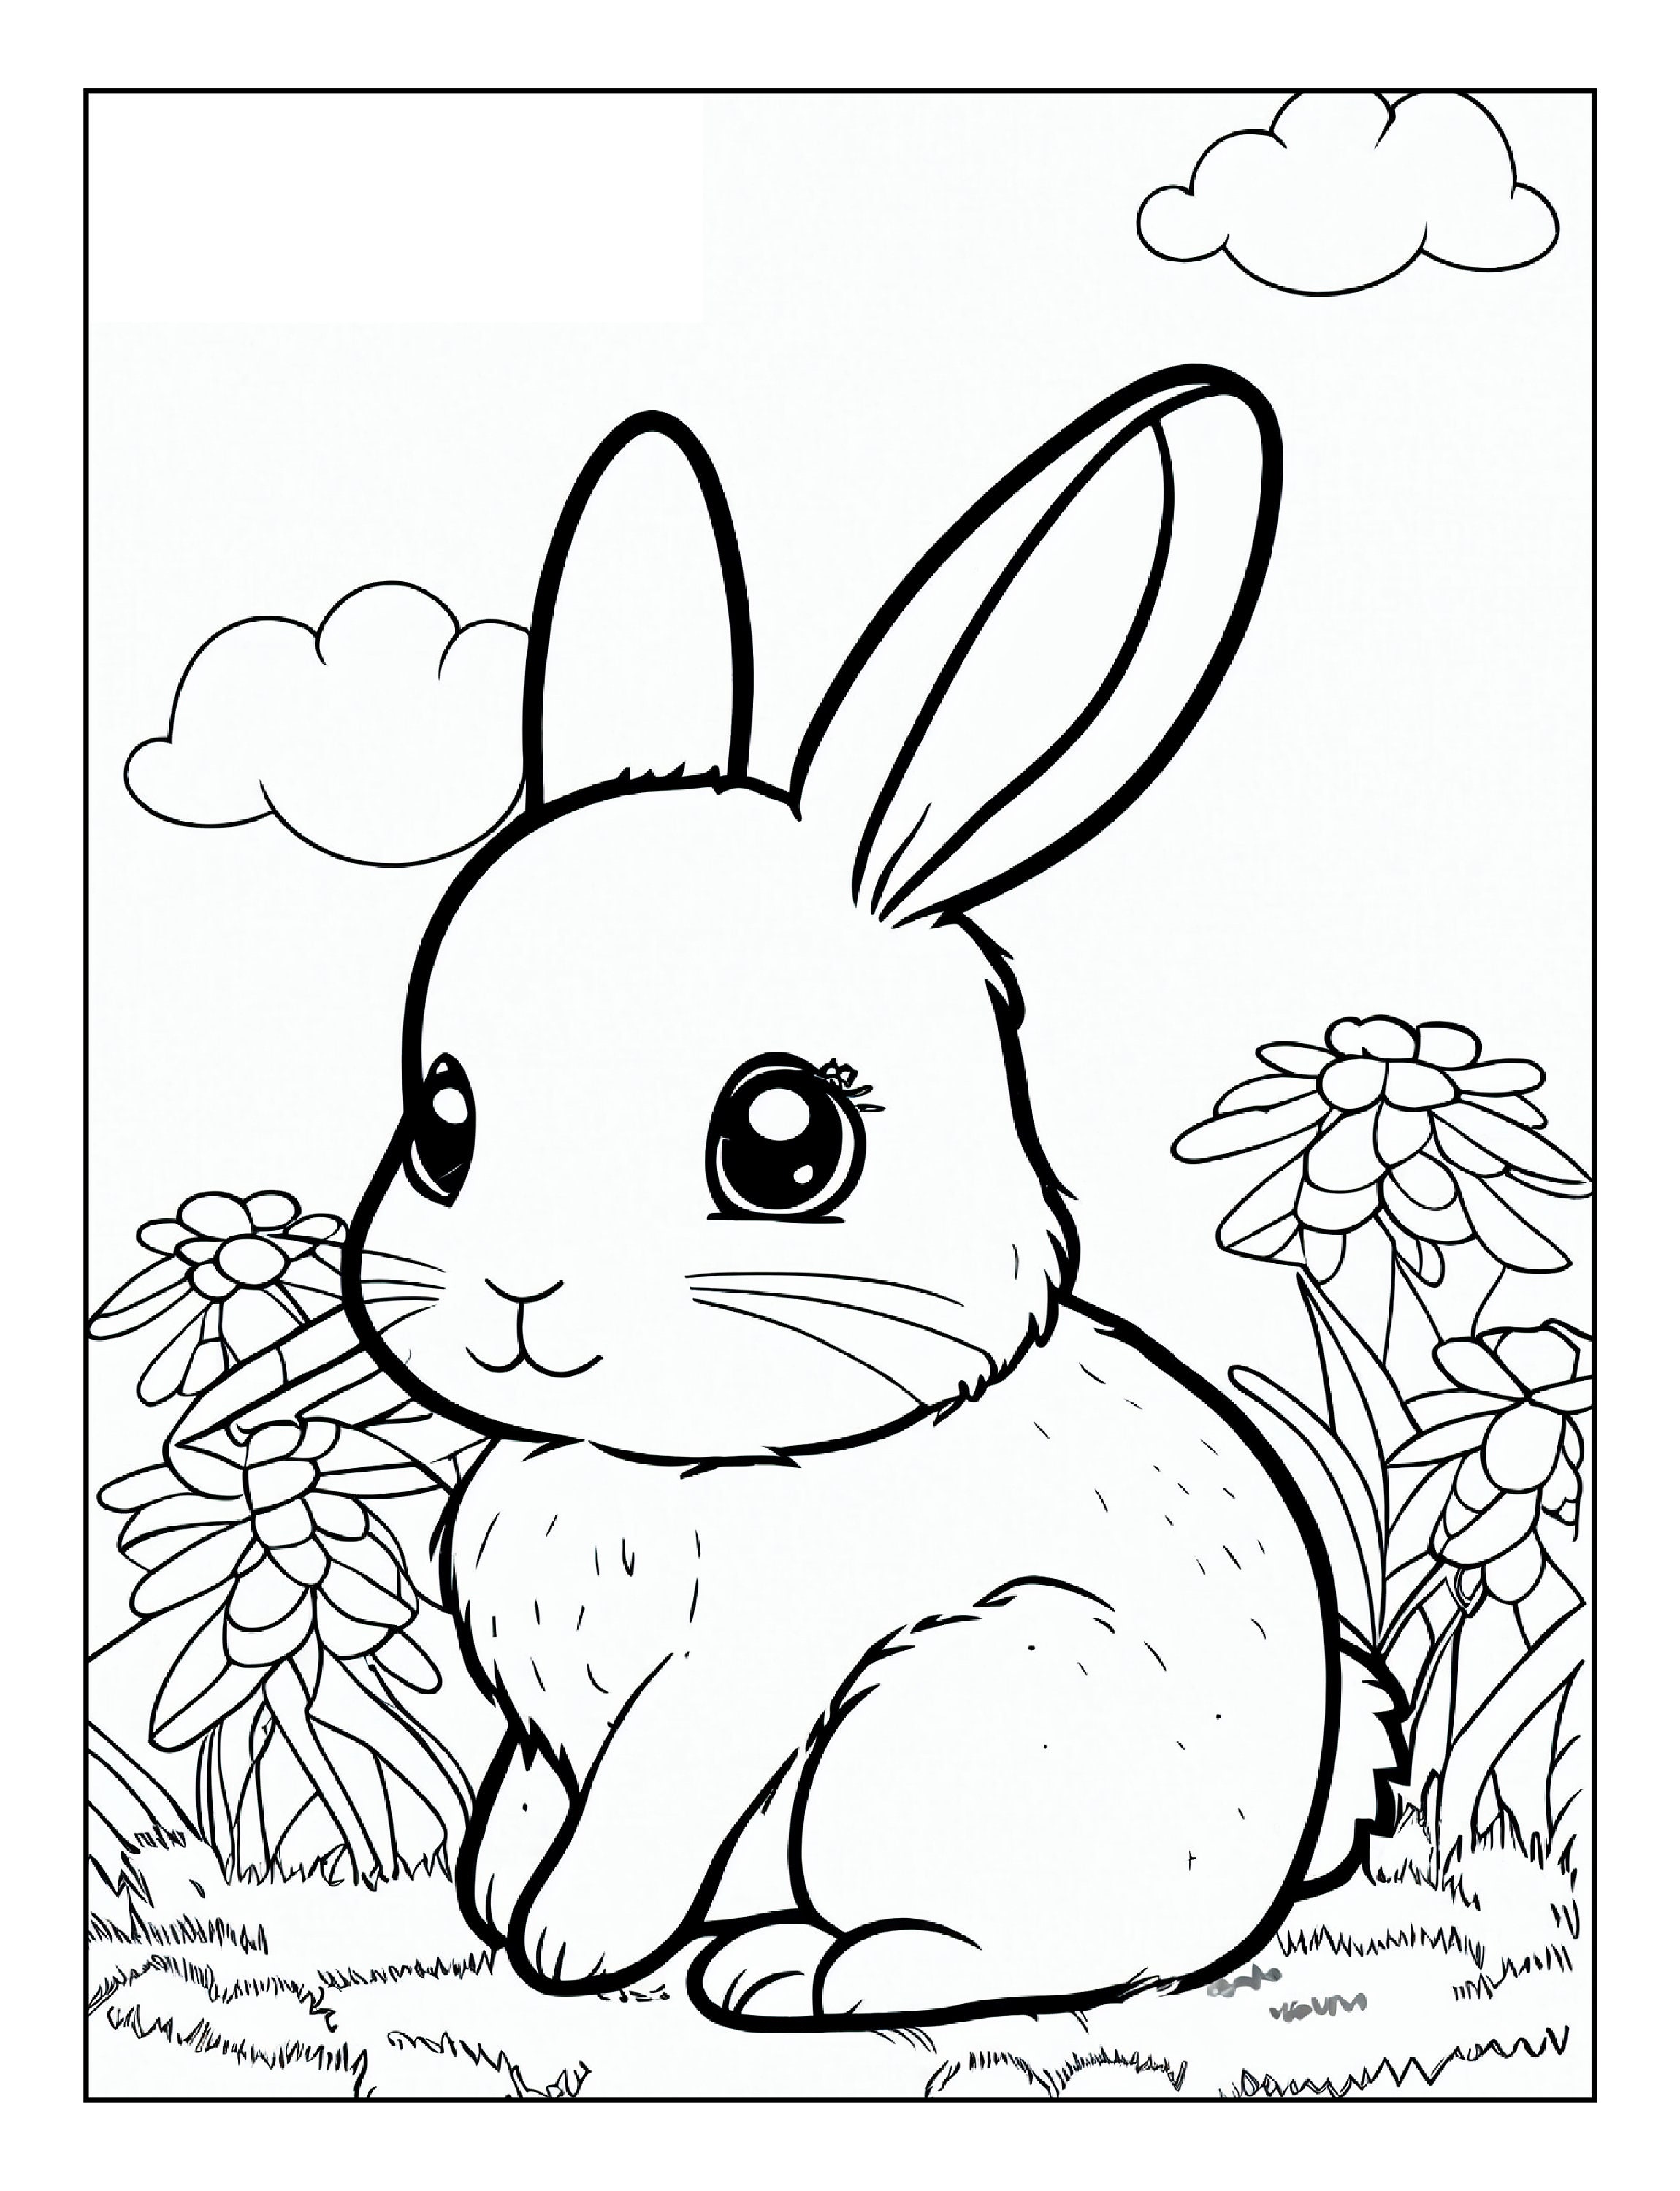 Cute Animal Coloring Book for Kids: Fun and Easy Coloring Pages with Dog,  Rabbit, Panda, Sheep, and Many More for Boys, Girls, Kids Ages 7-12:   Imagination with Fun and Easy Coloring